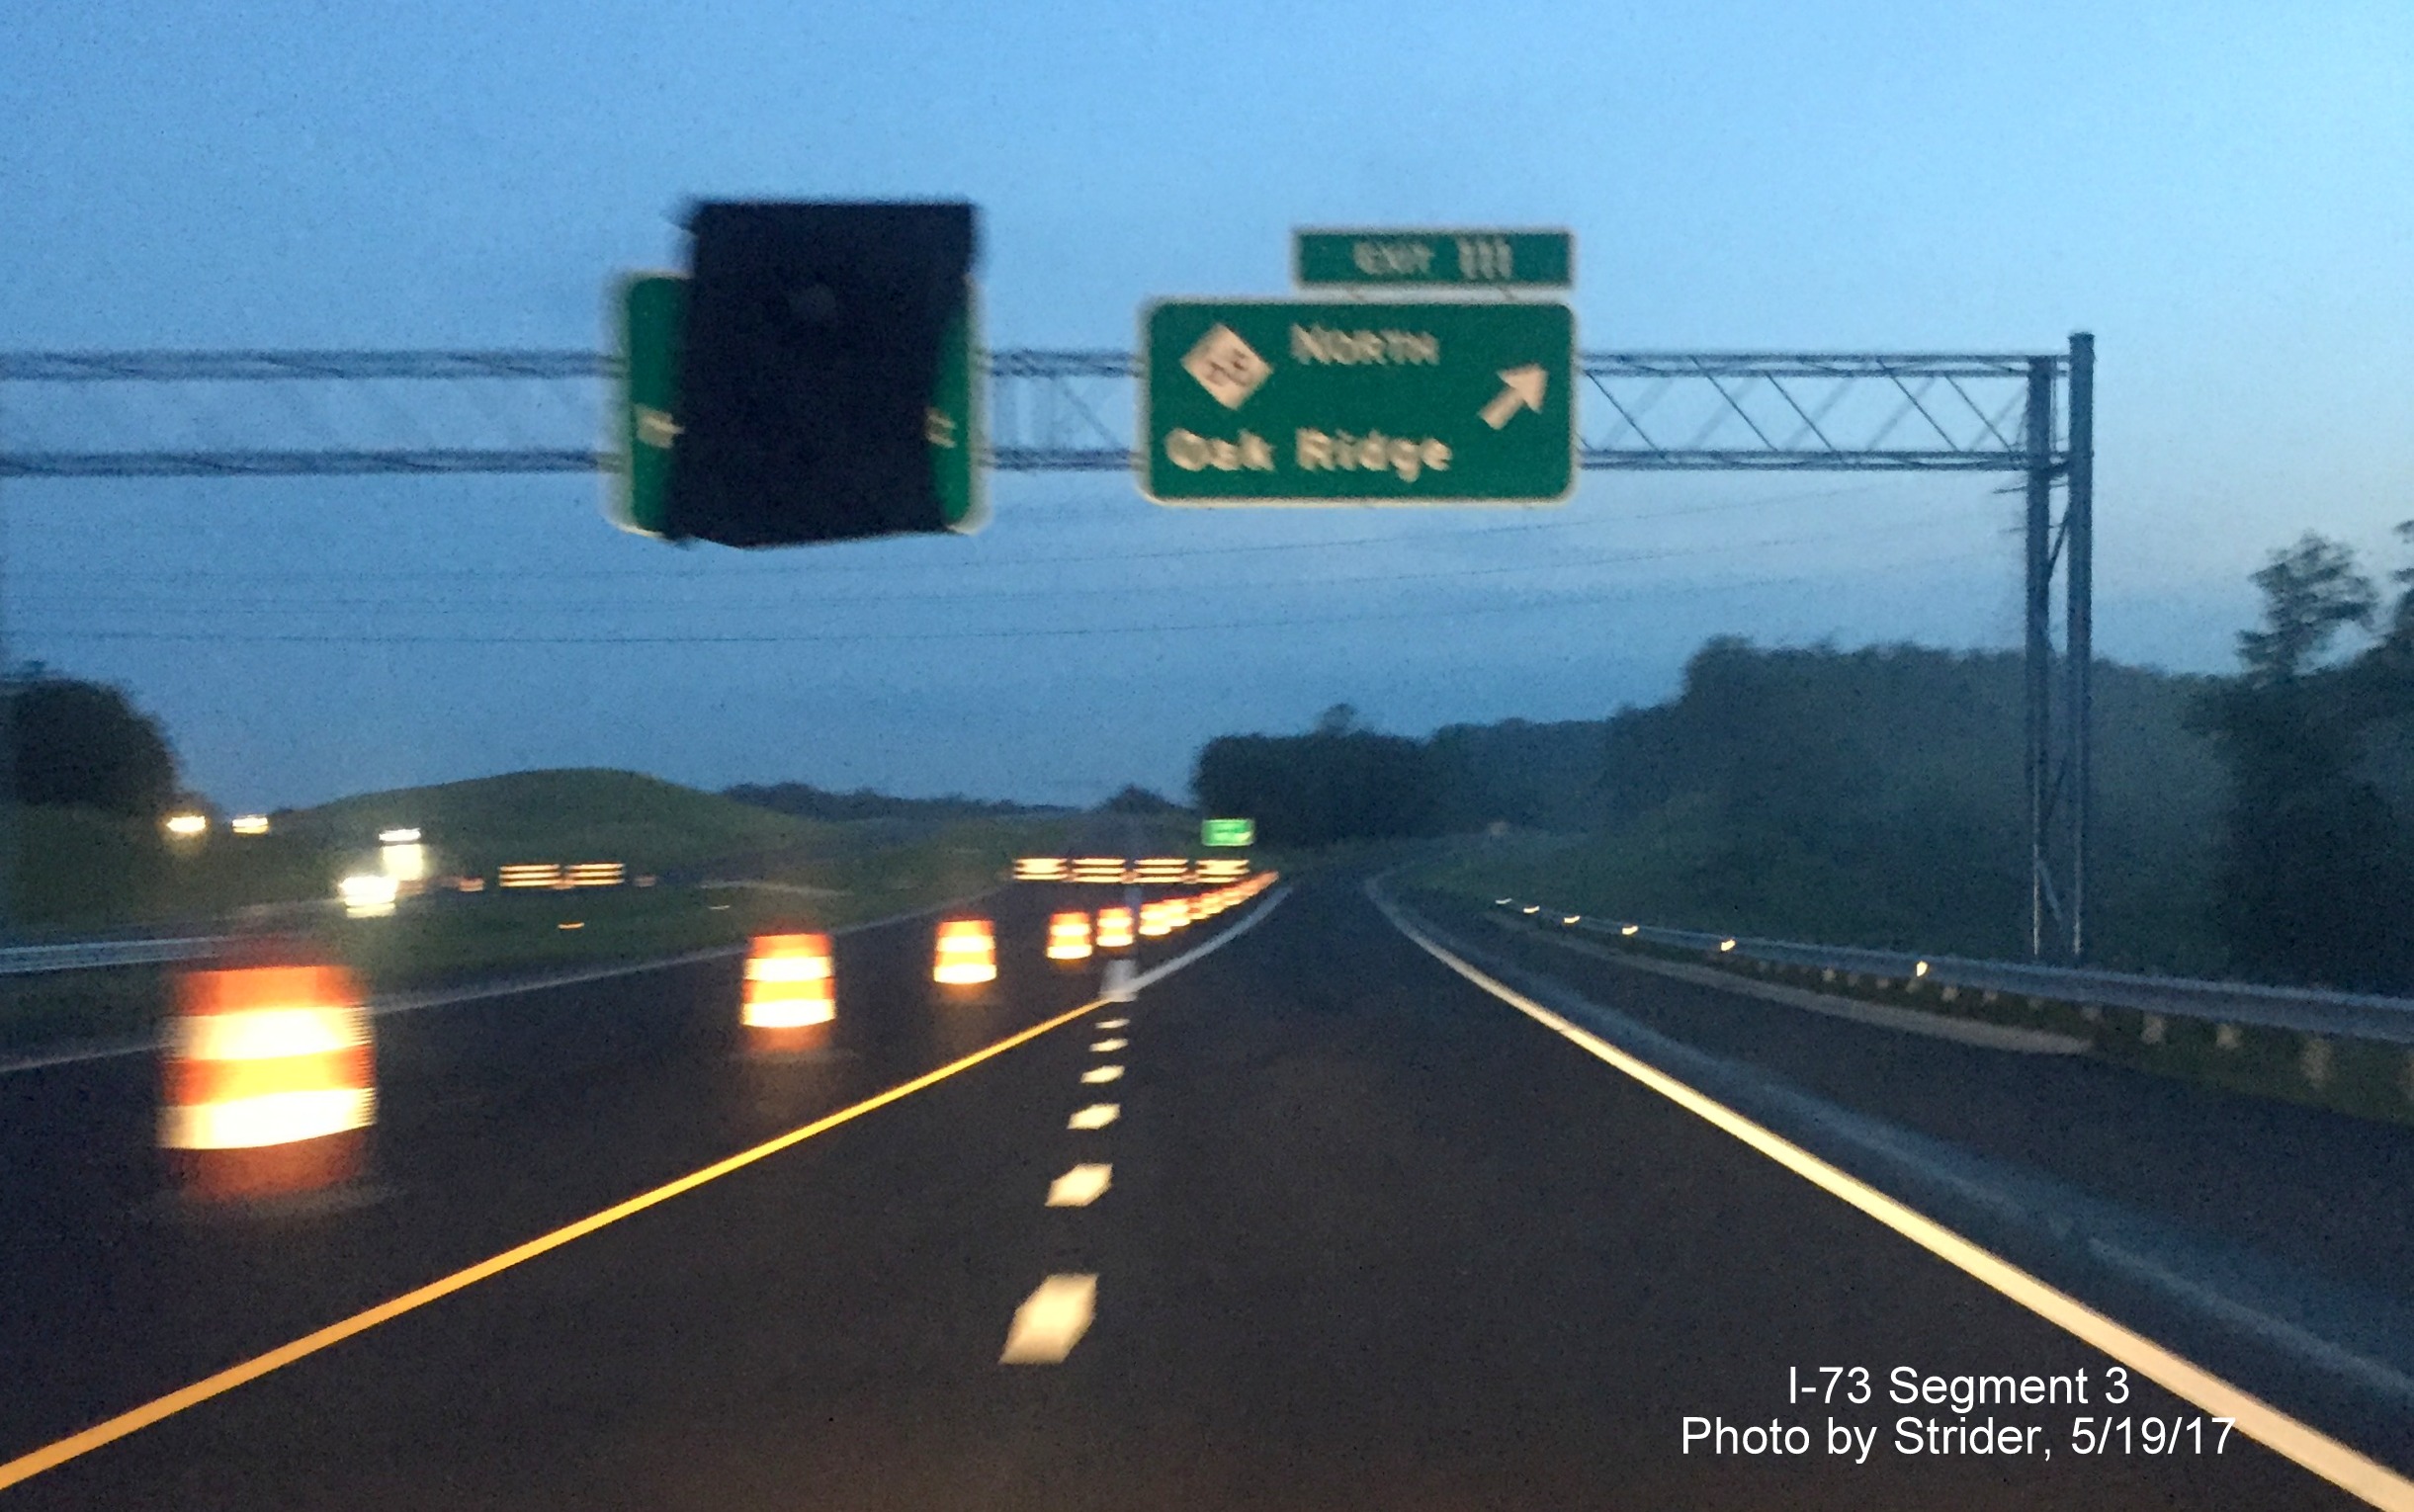 Image taken of overhead signage at temporary end to newly opened I-73 South highway north of Greensboro at NC 68, by Strider